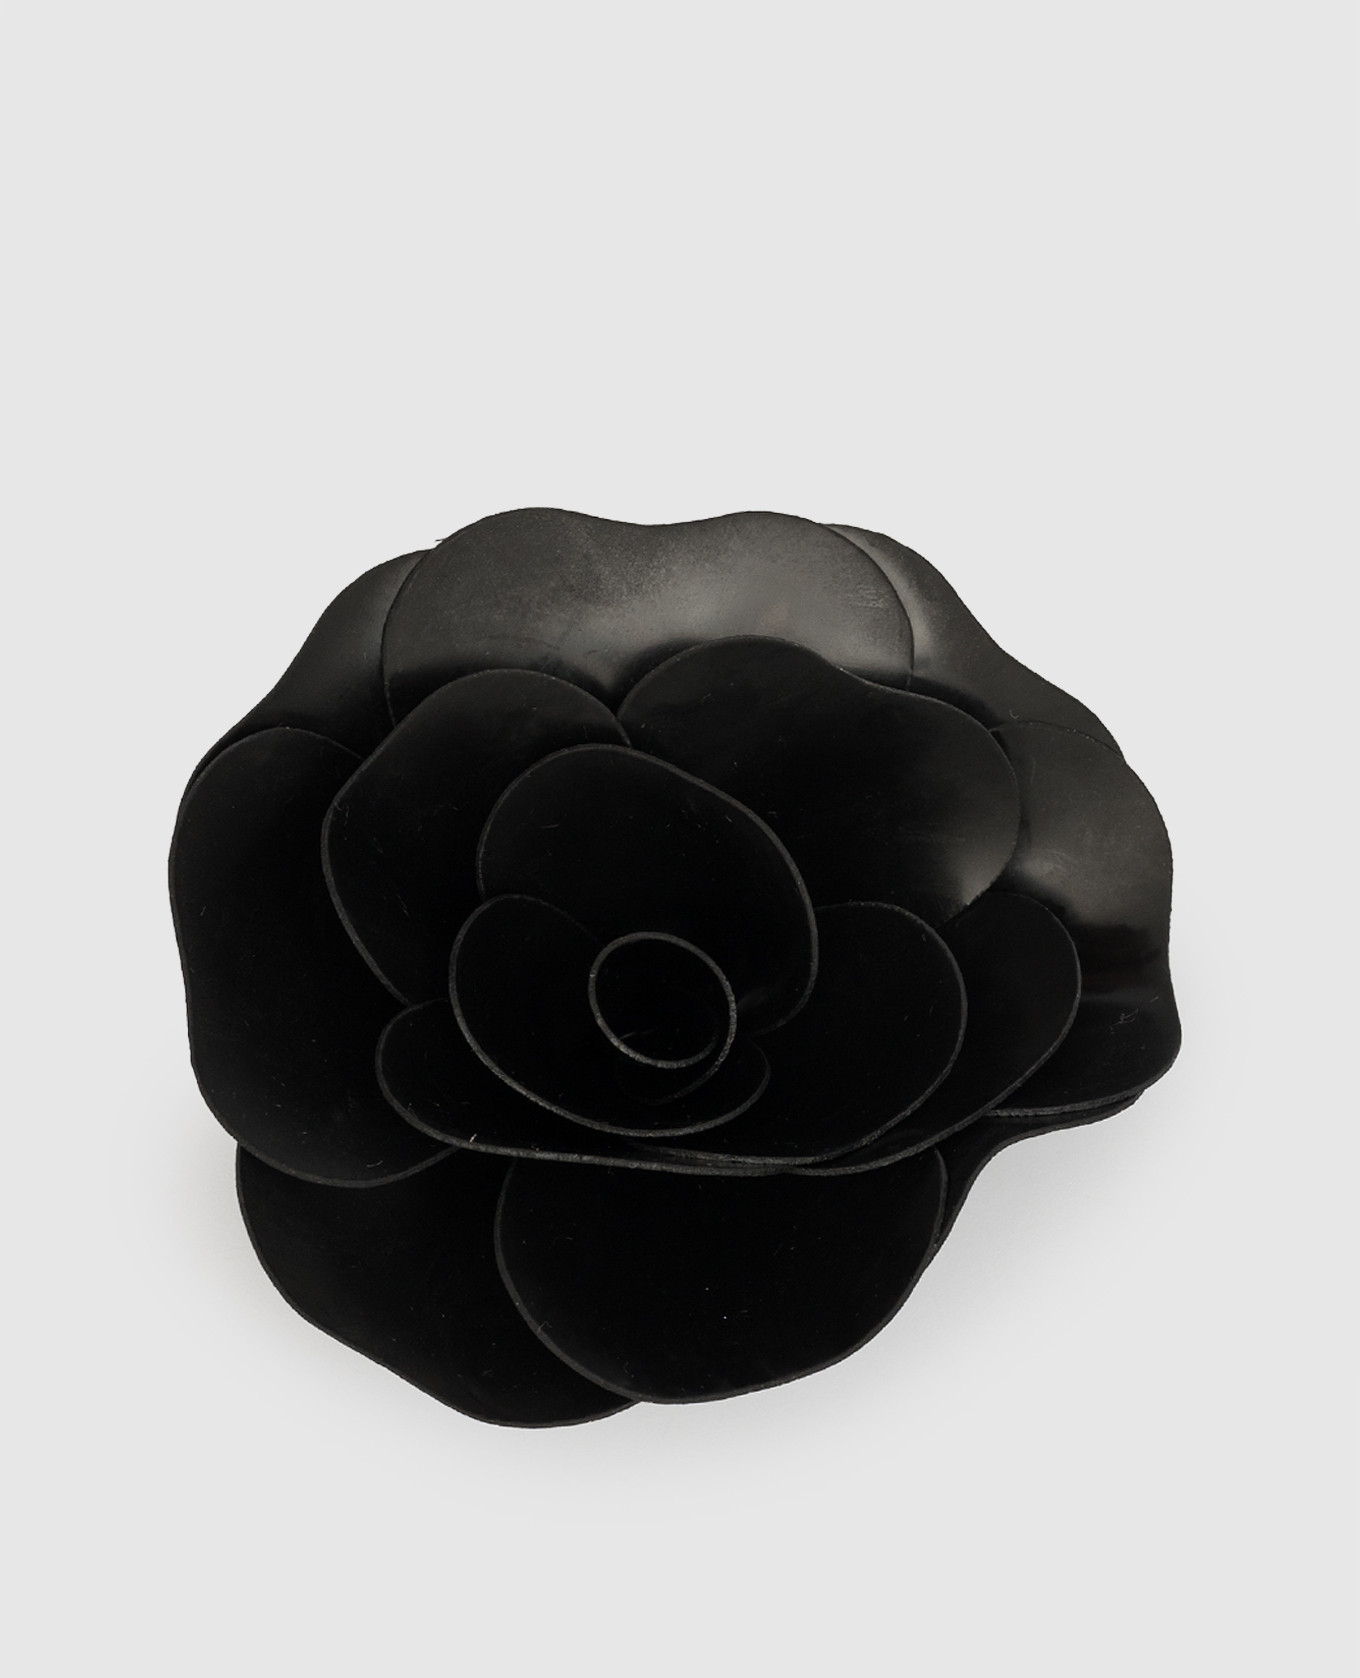 Black brooch in the form of a flower